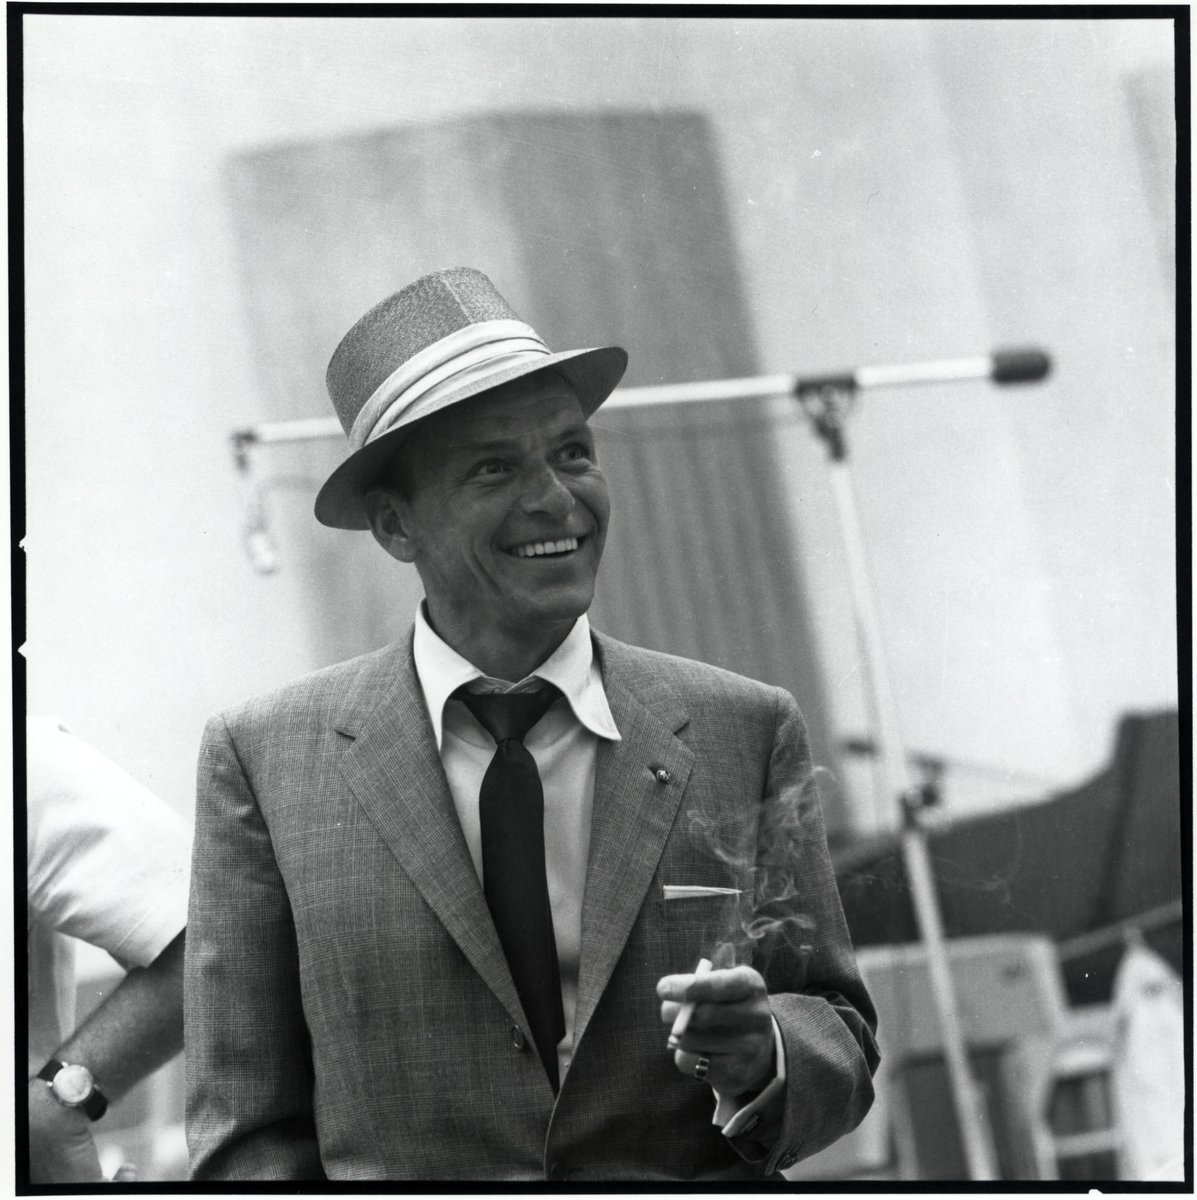 Frank Sinatra: Was The Singer A Racist? Why Was He Hated By The Public? Here Is What You Should Know